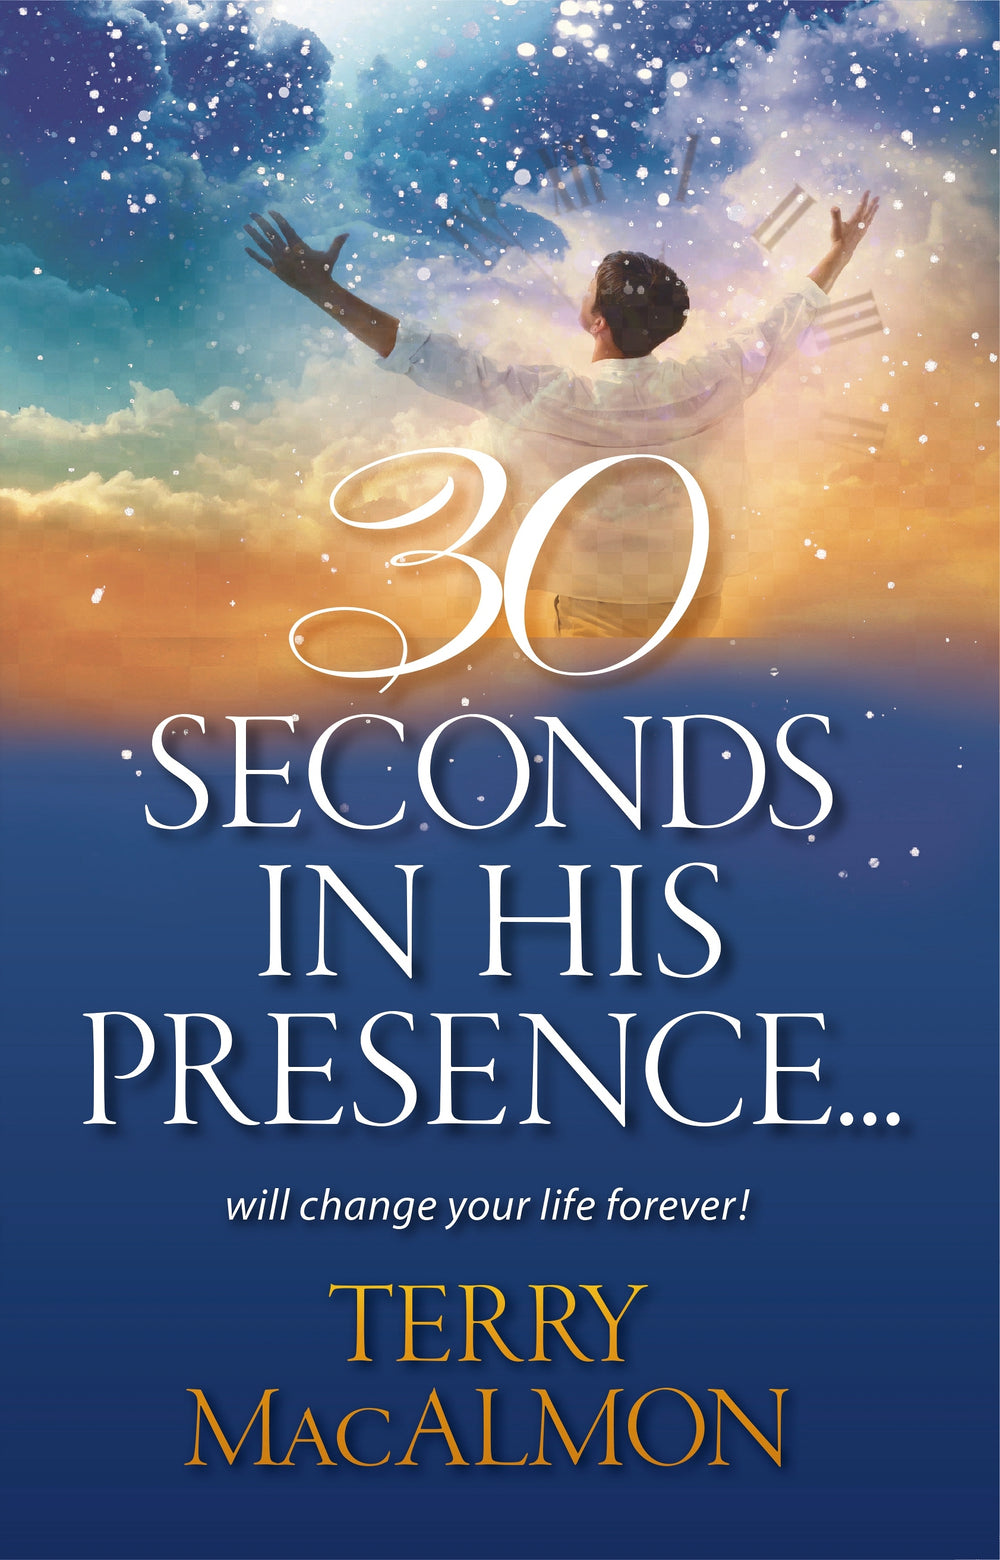 30 Seconds In His Presence - Terry MacAlmon (Paperback)